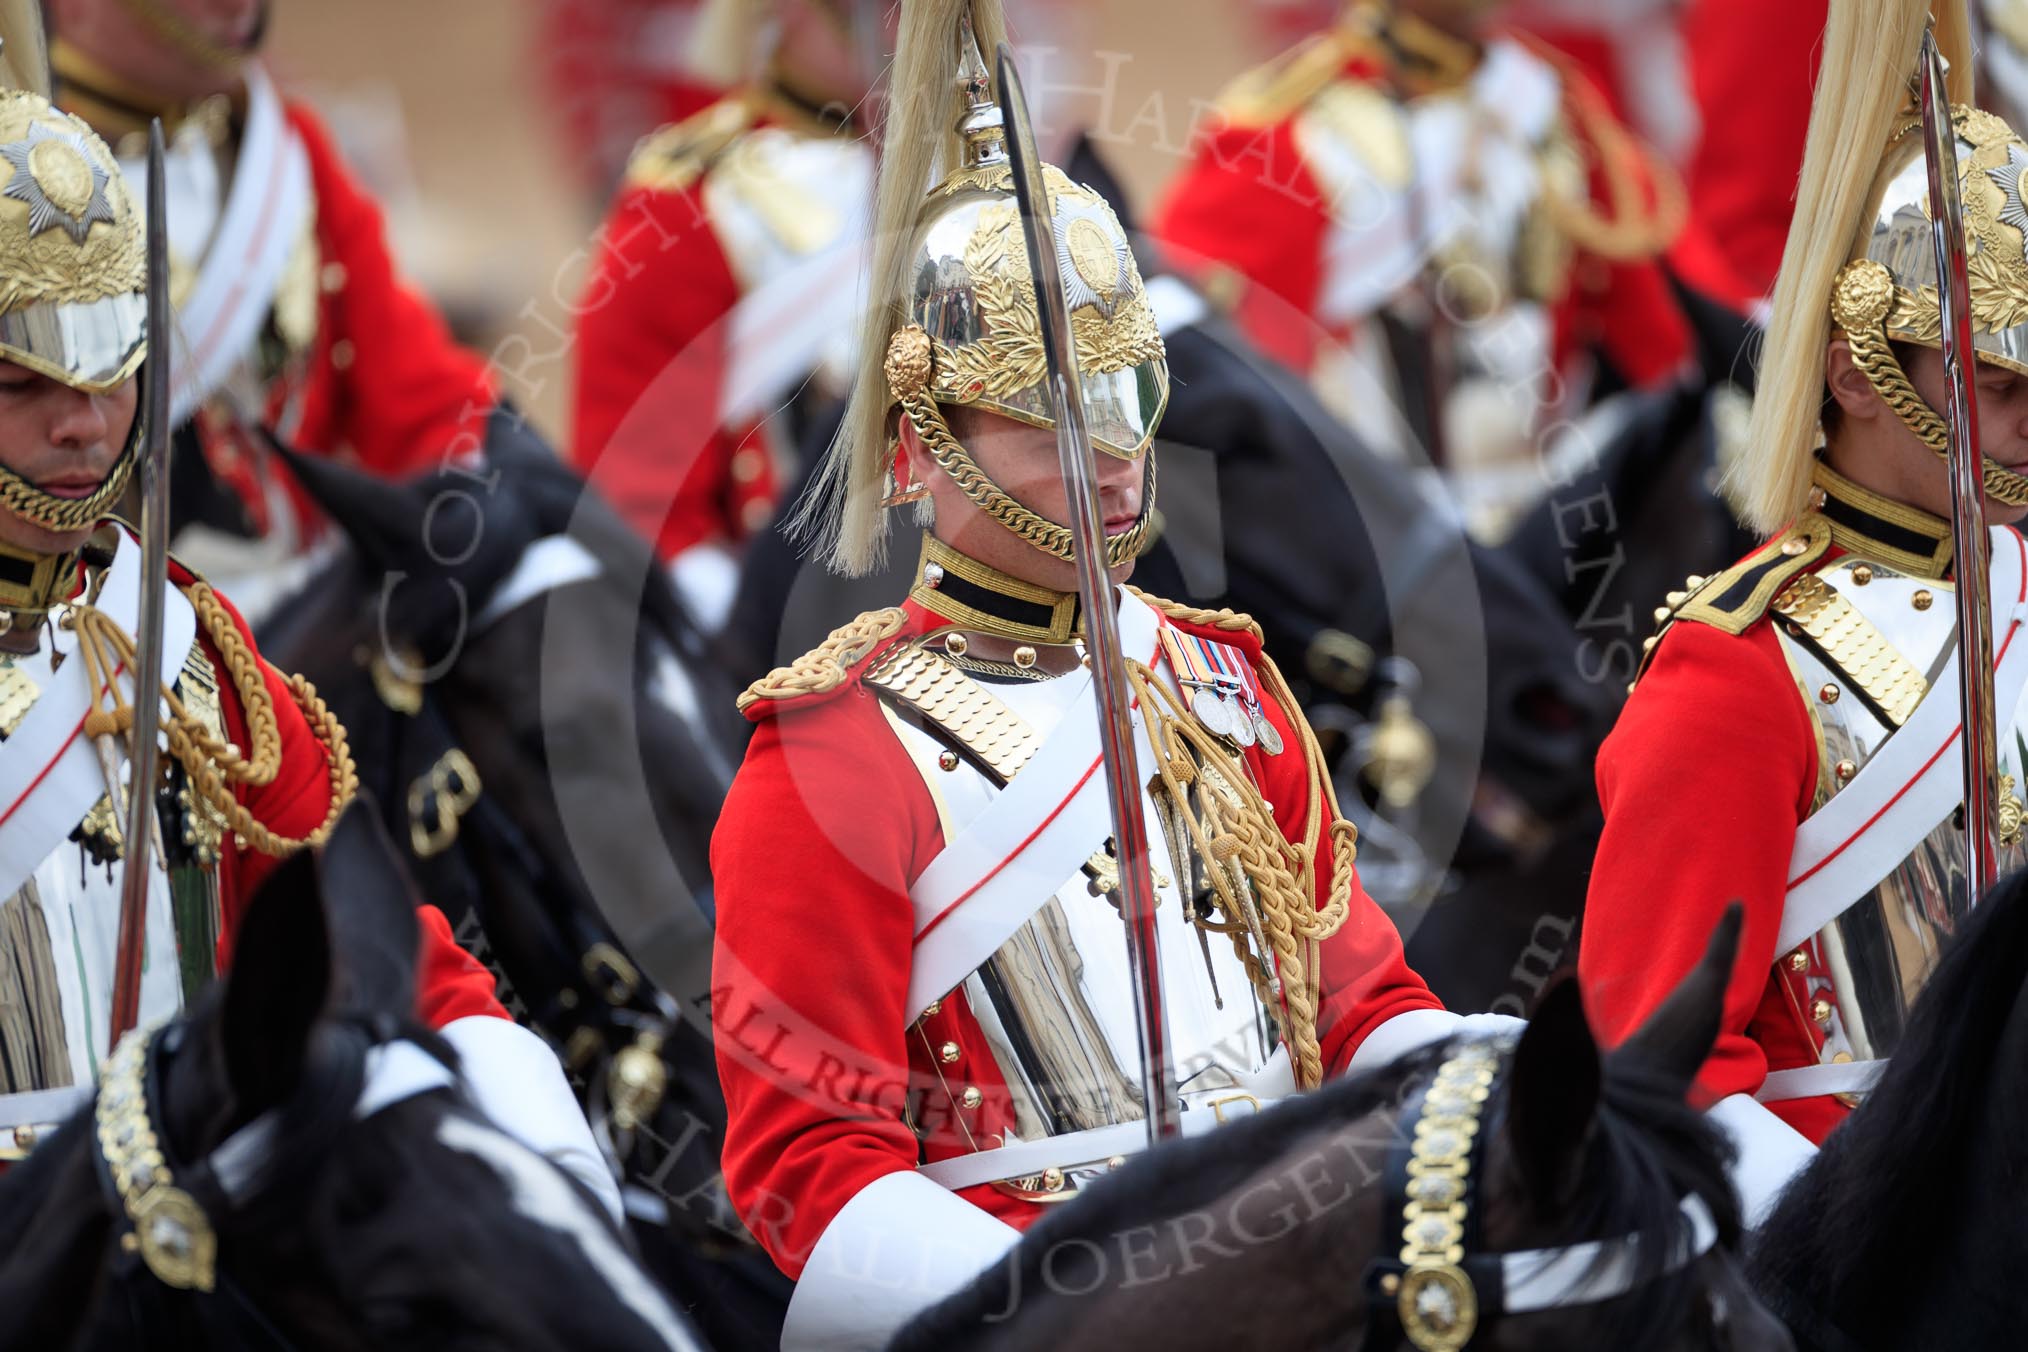 during The Colonel's Review {iptcyear4} (final rehearsal for Trooping the Colour, The Queen's Birthday Parade)  at Horse Guards Parade, Westminster, London, 2 June 2018, 11:59.